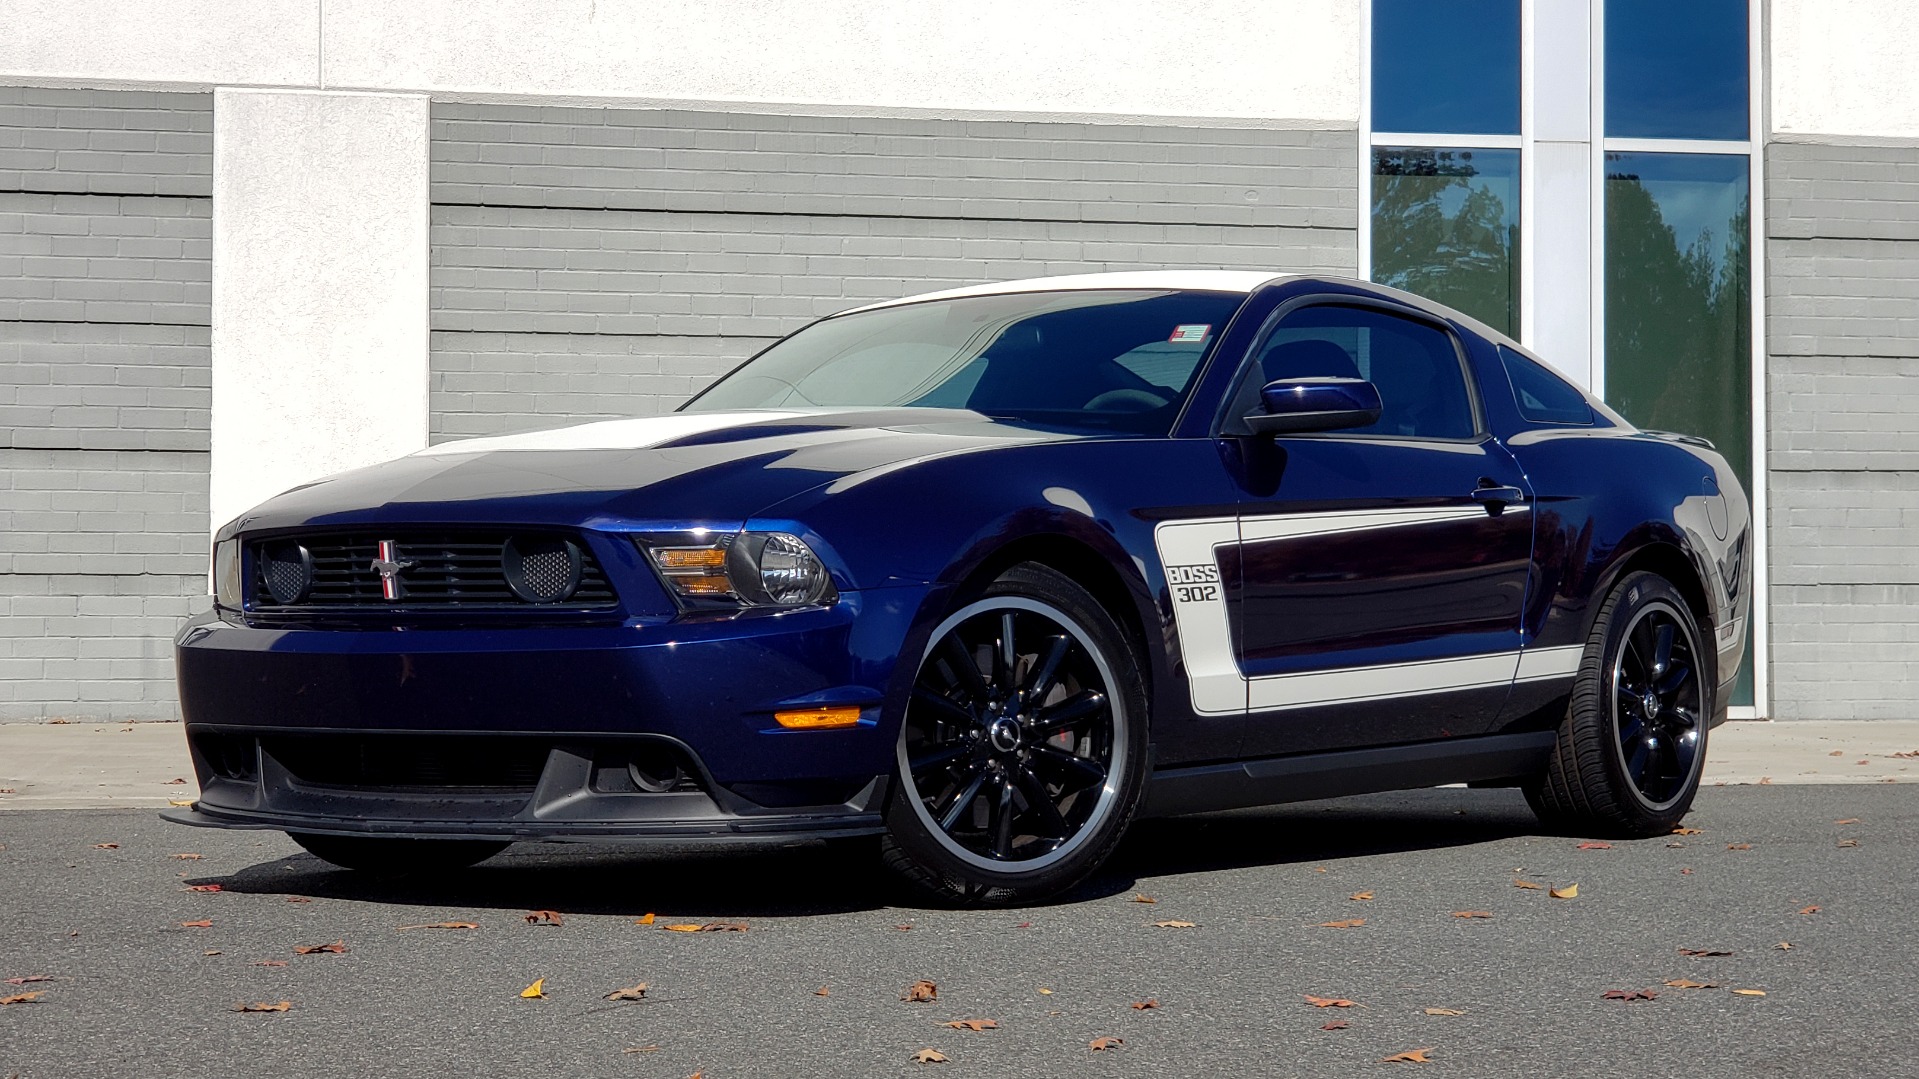 Used 2012 Ford MUSTANG BOSS 302 COUPE / 5.0L / 6-SPD MAN / RECARO SEATS / 3.73 GEARS for sale Sold at Formula Imports in Charlotte NC 28227 9